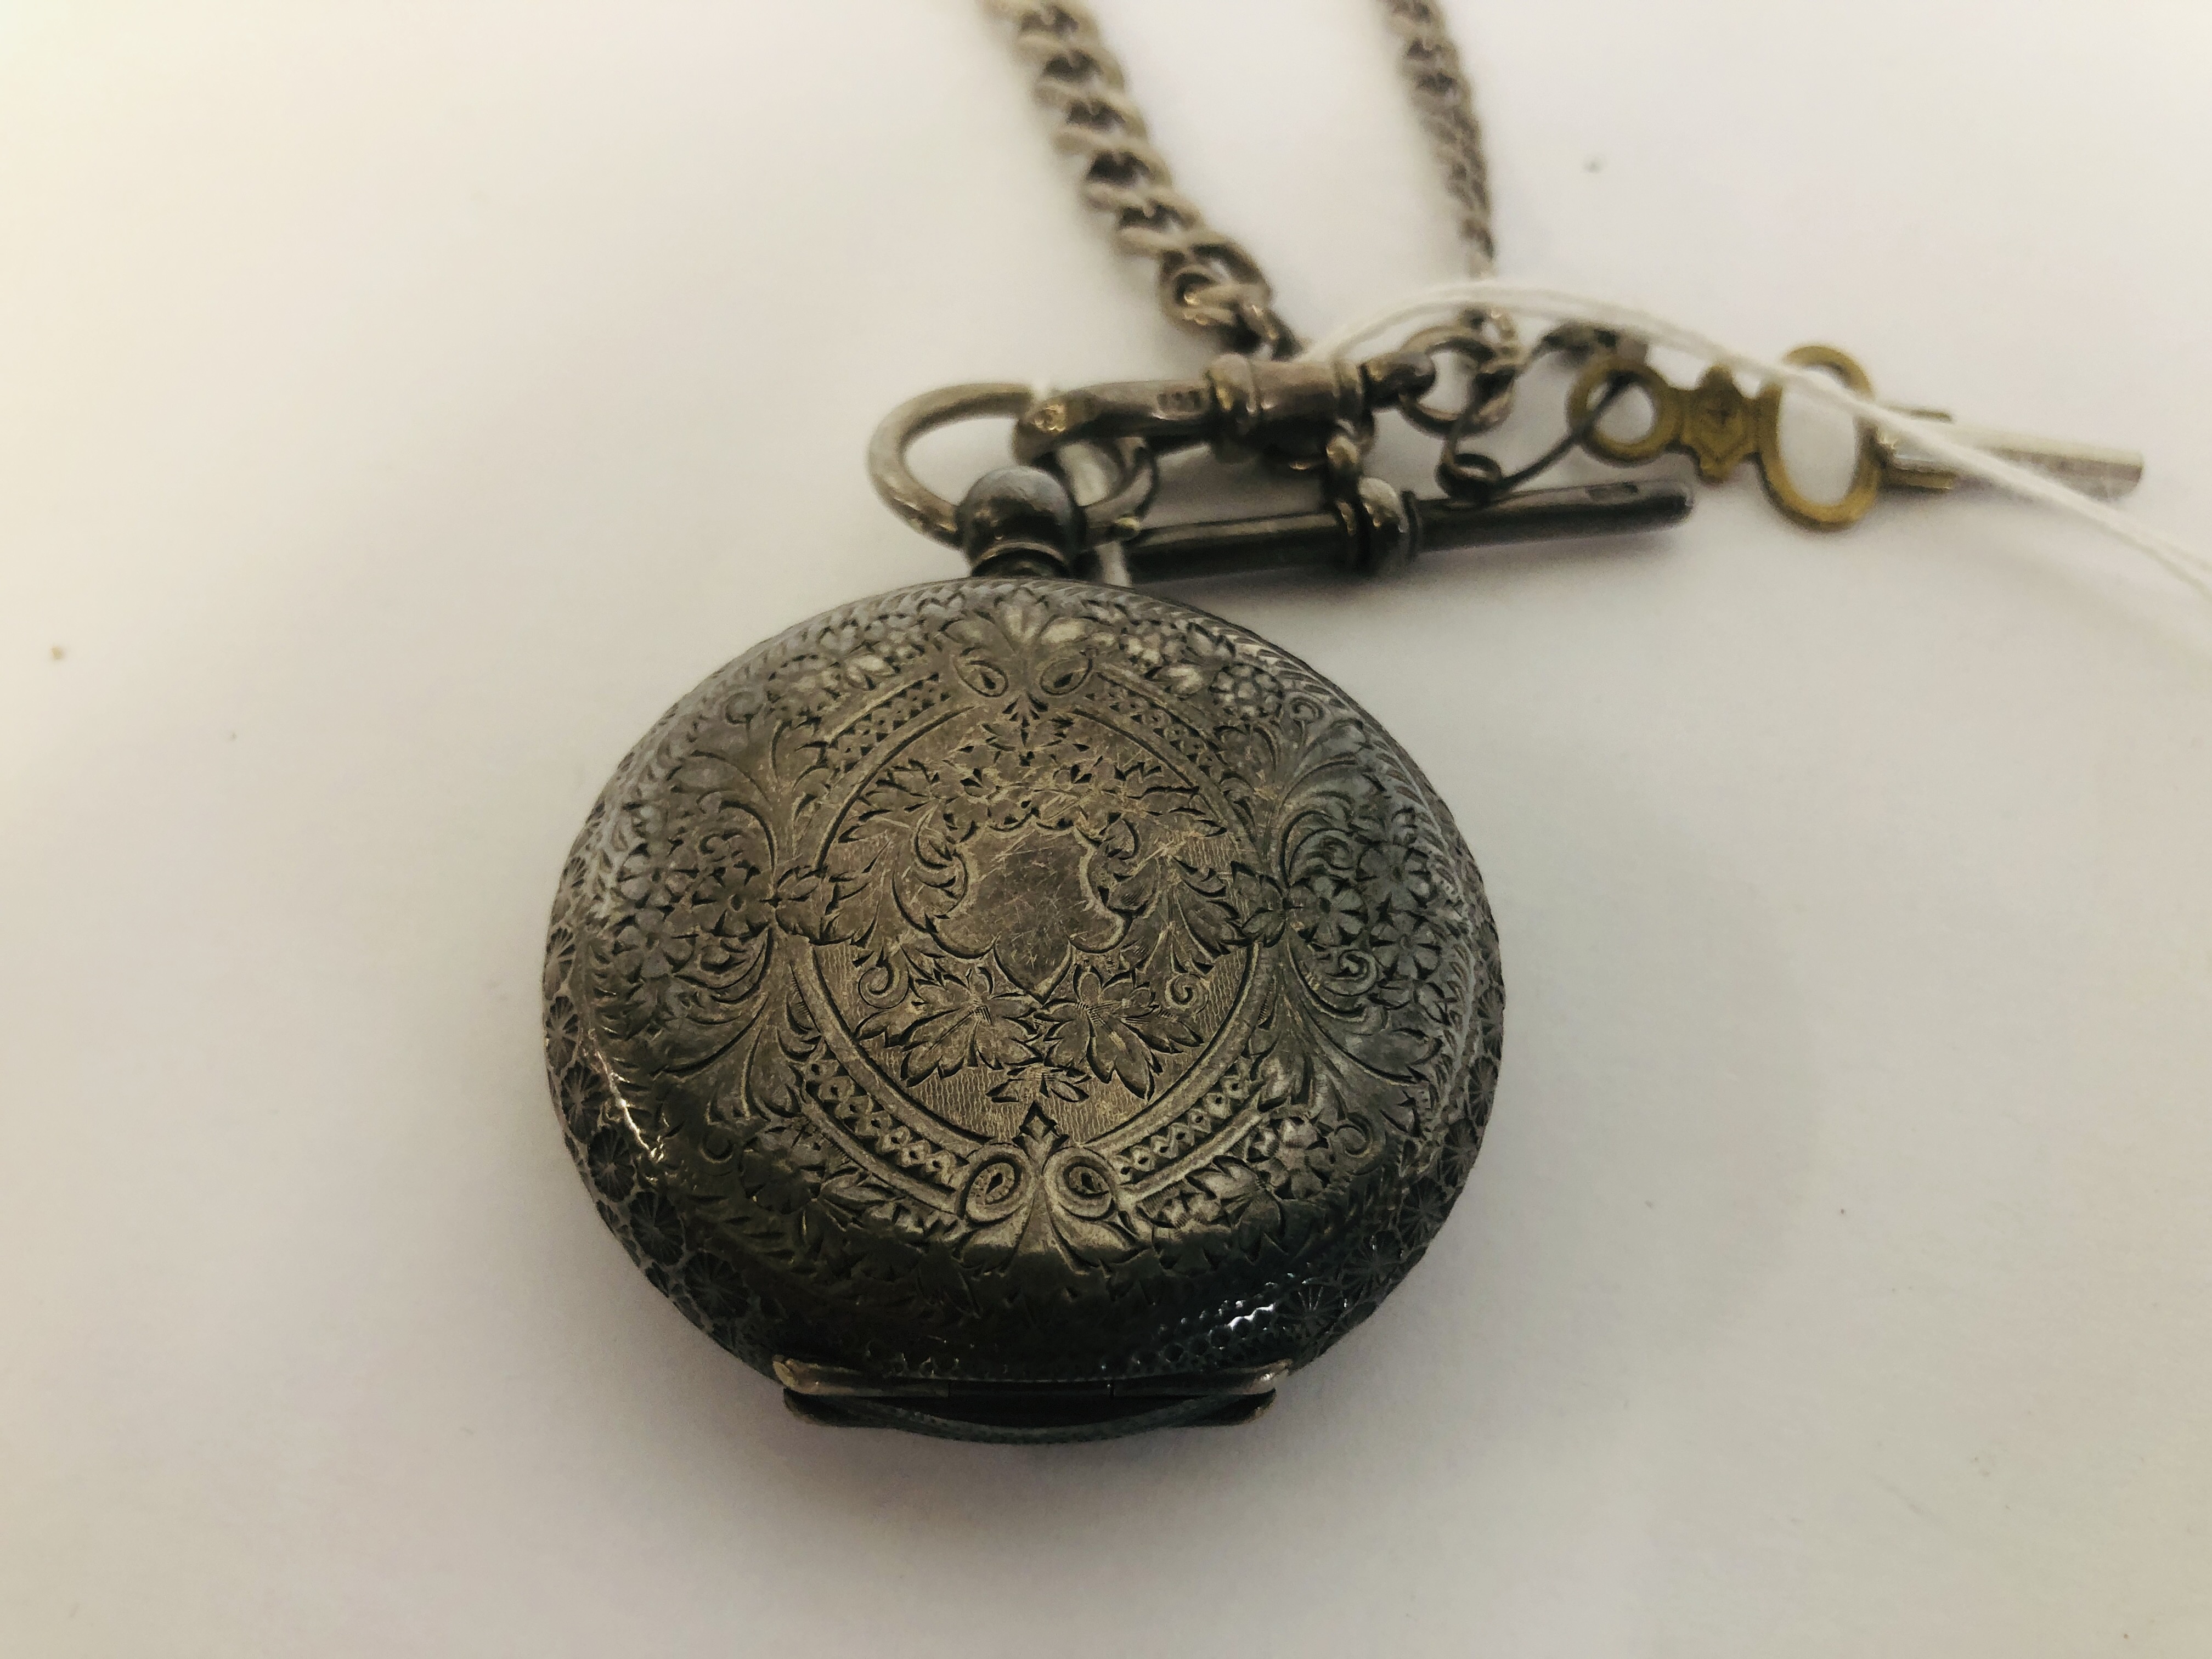 AN ORNATE SILVER POCKET WATCH WITH DECORATIVE ENAMELLED FACE ON SILVER T-BAR CHAIN - Image 6 of 6